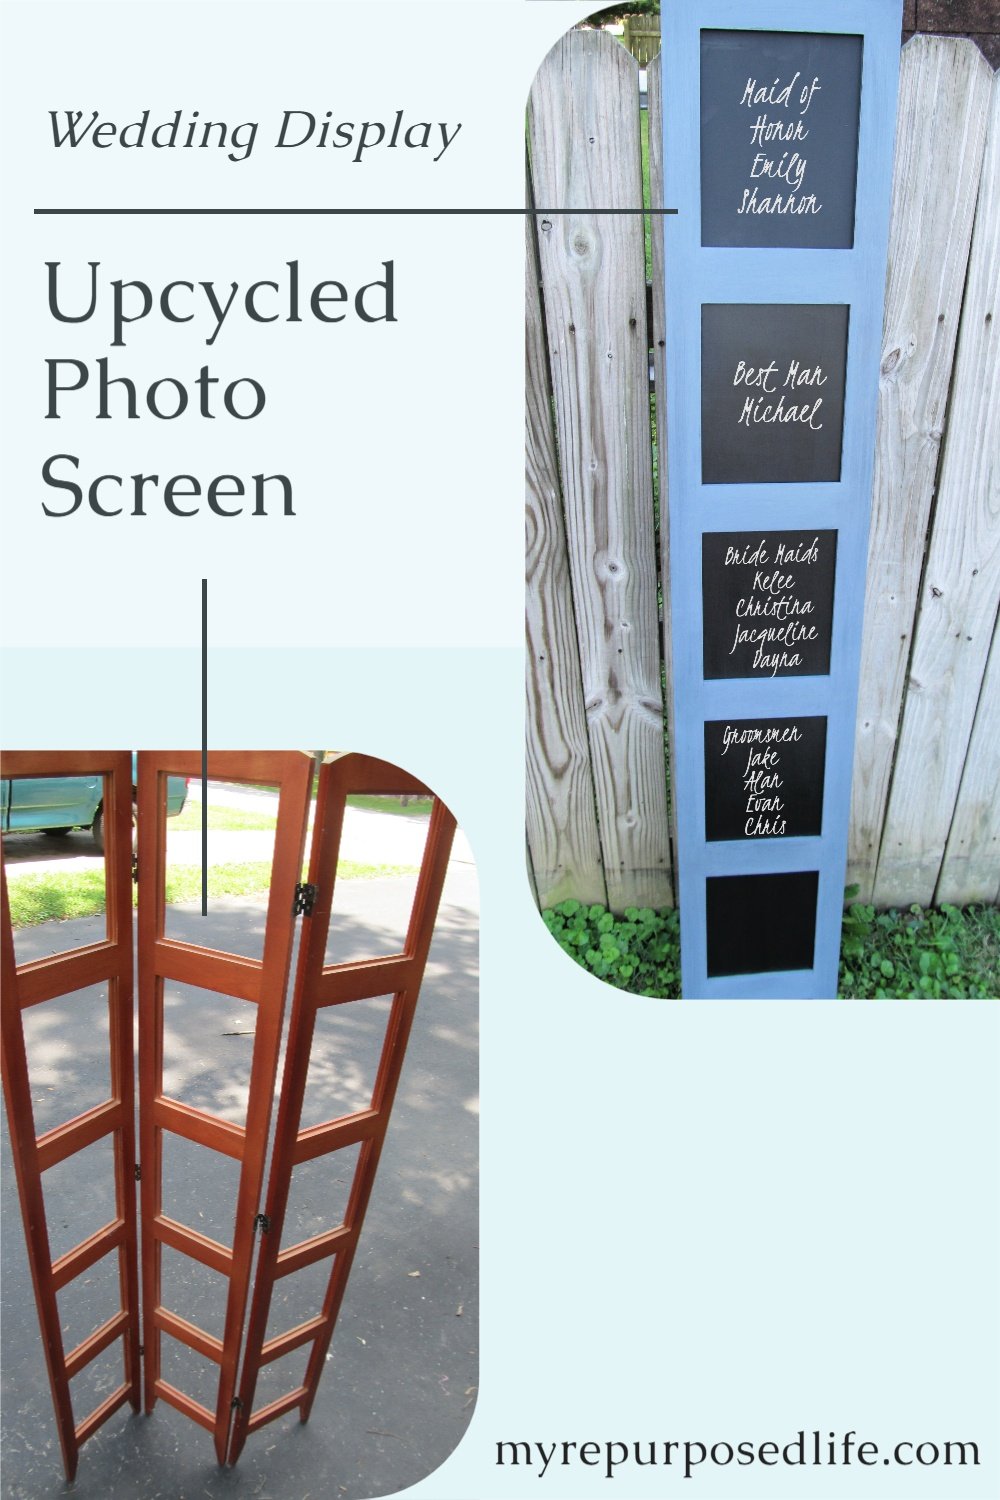 Make a room divider chalkboard out of a former photo display piece. Great for wedding display or busy family chore chart. #MyRepurposedLife #upcycle #roomdivider #photodisplay #wedding #chorechart #chalkboard via @repurposedlife